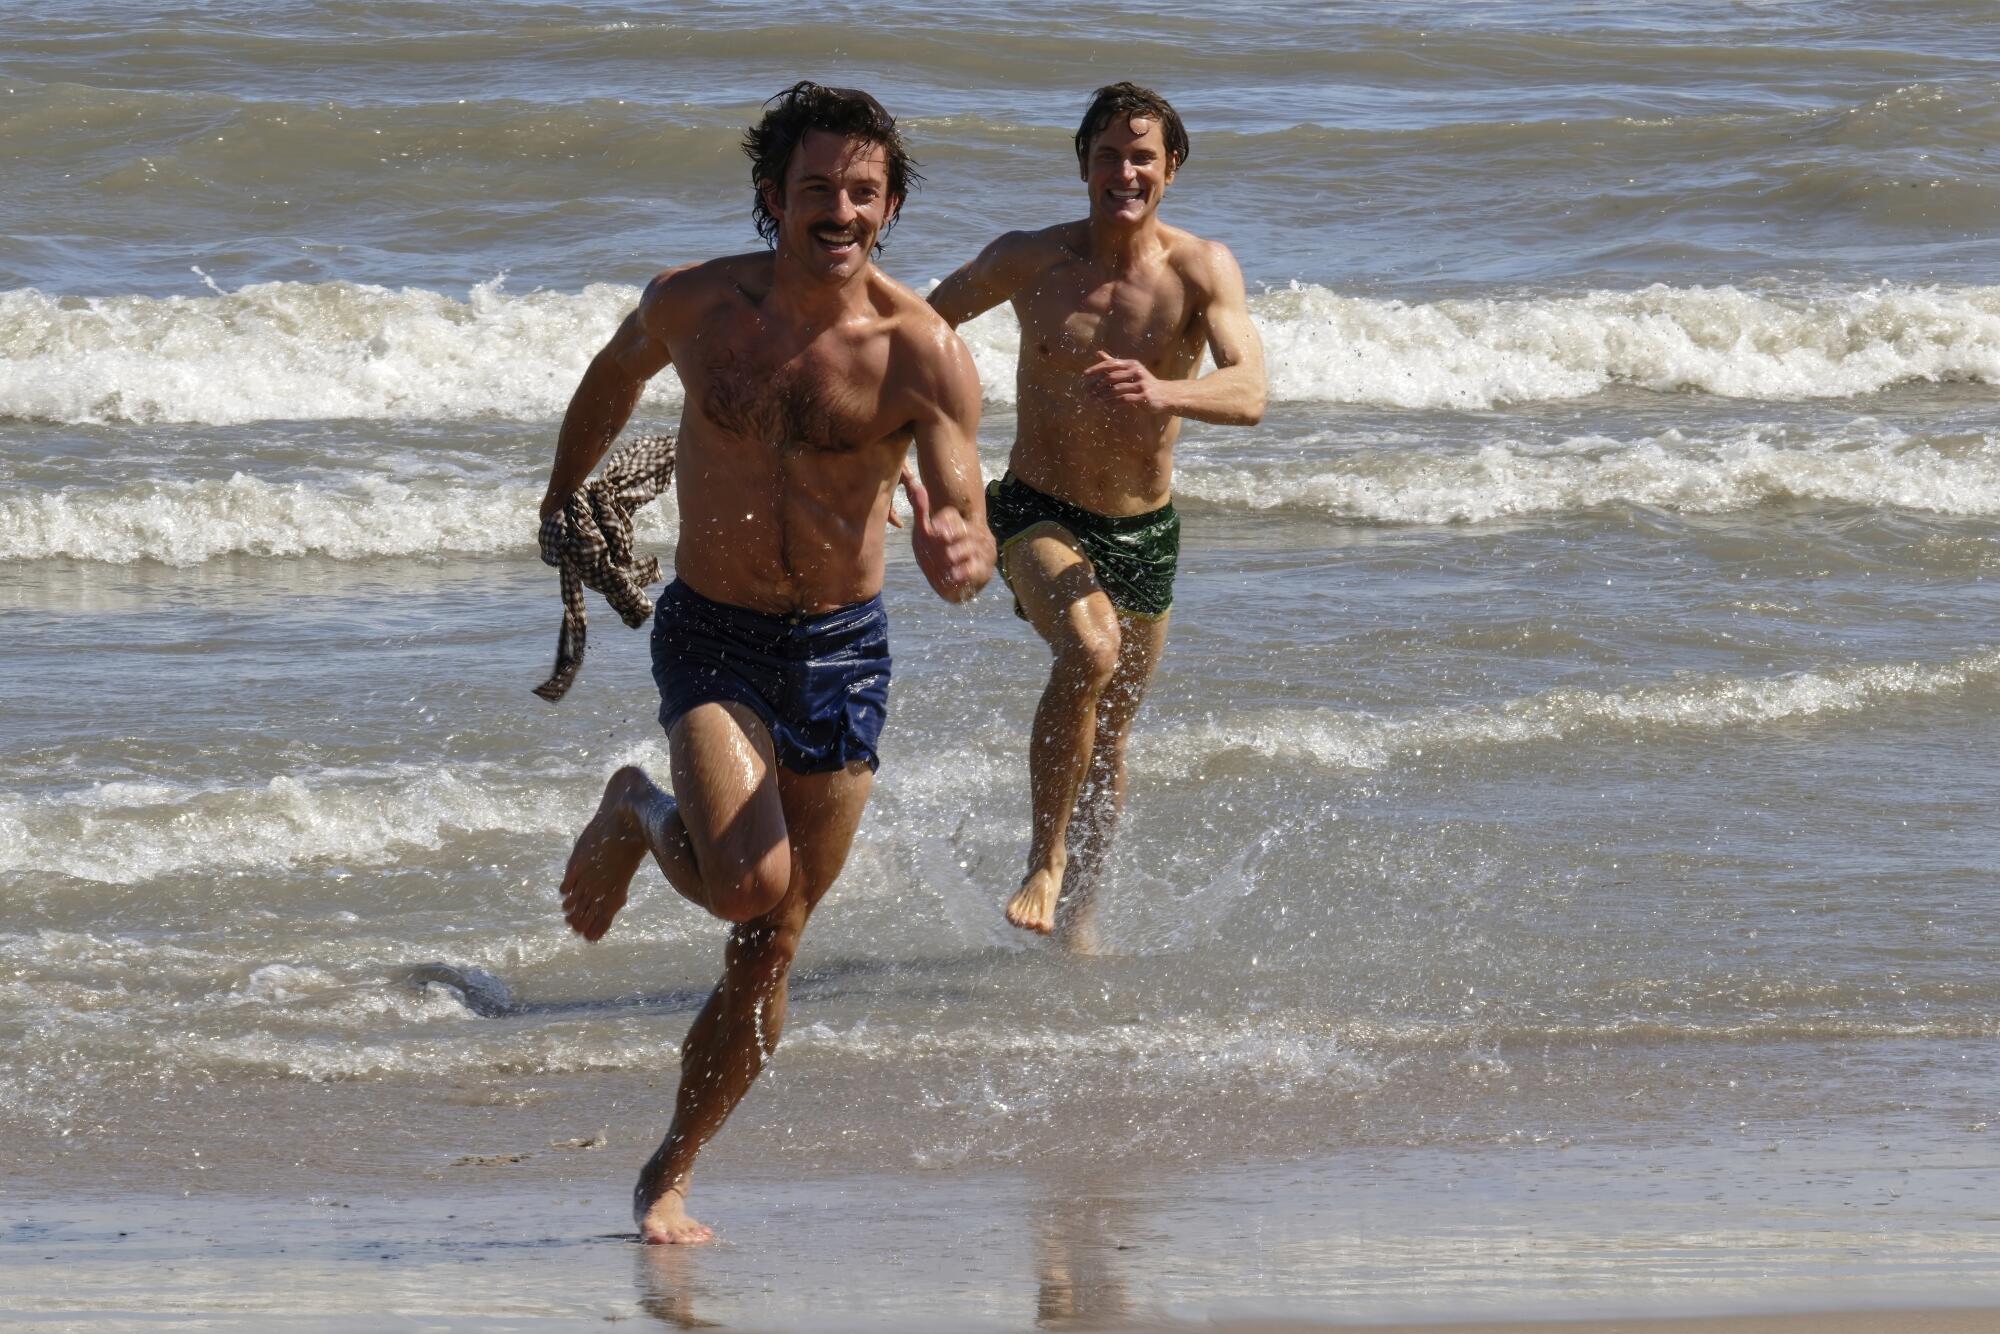 Two bare-chested men in swimming trunks run through the waves on the beach.